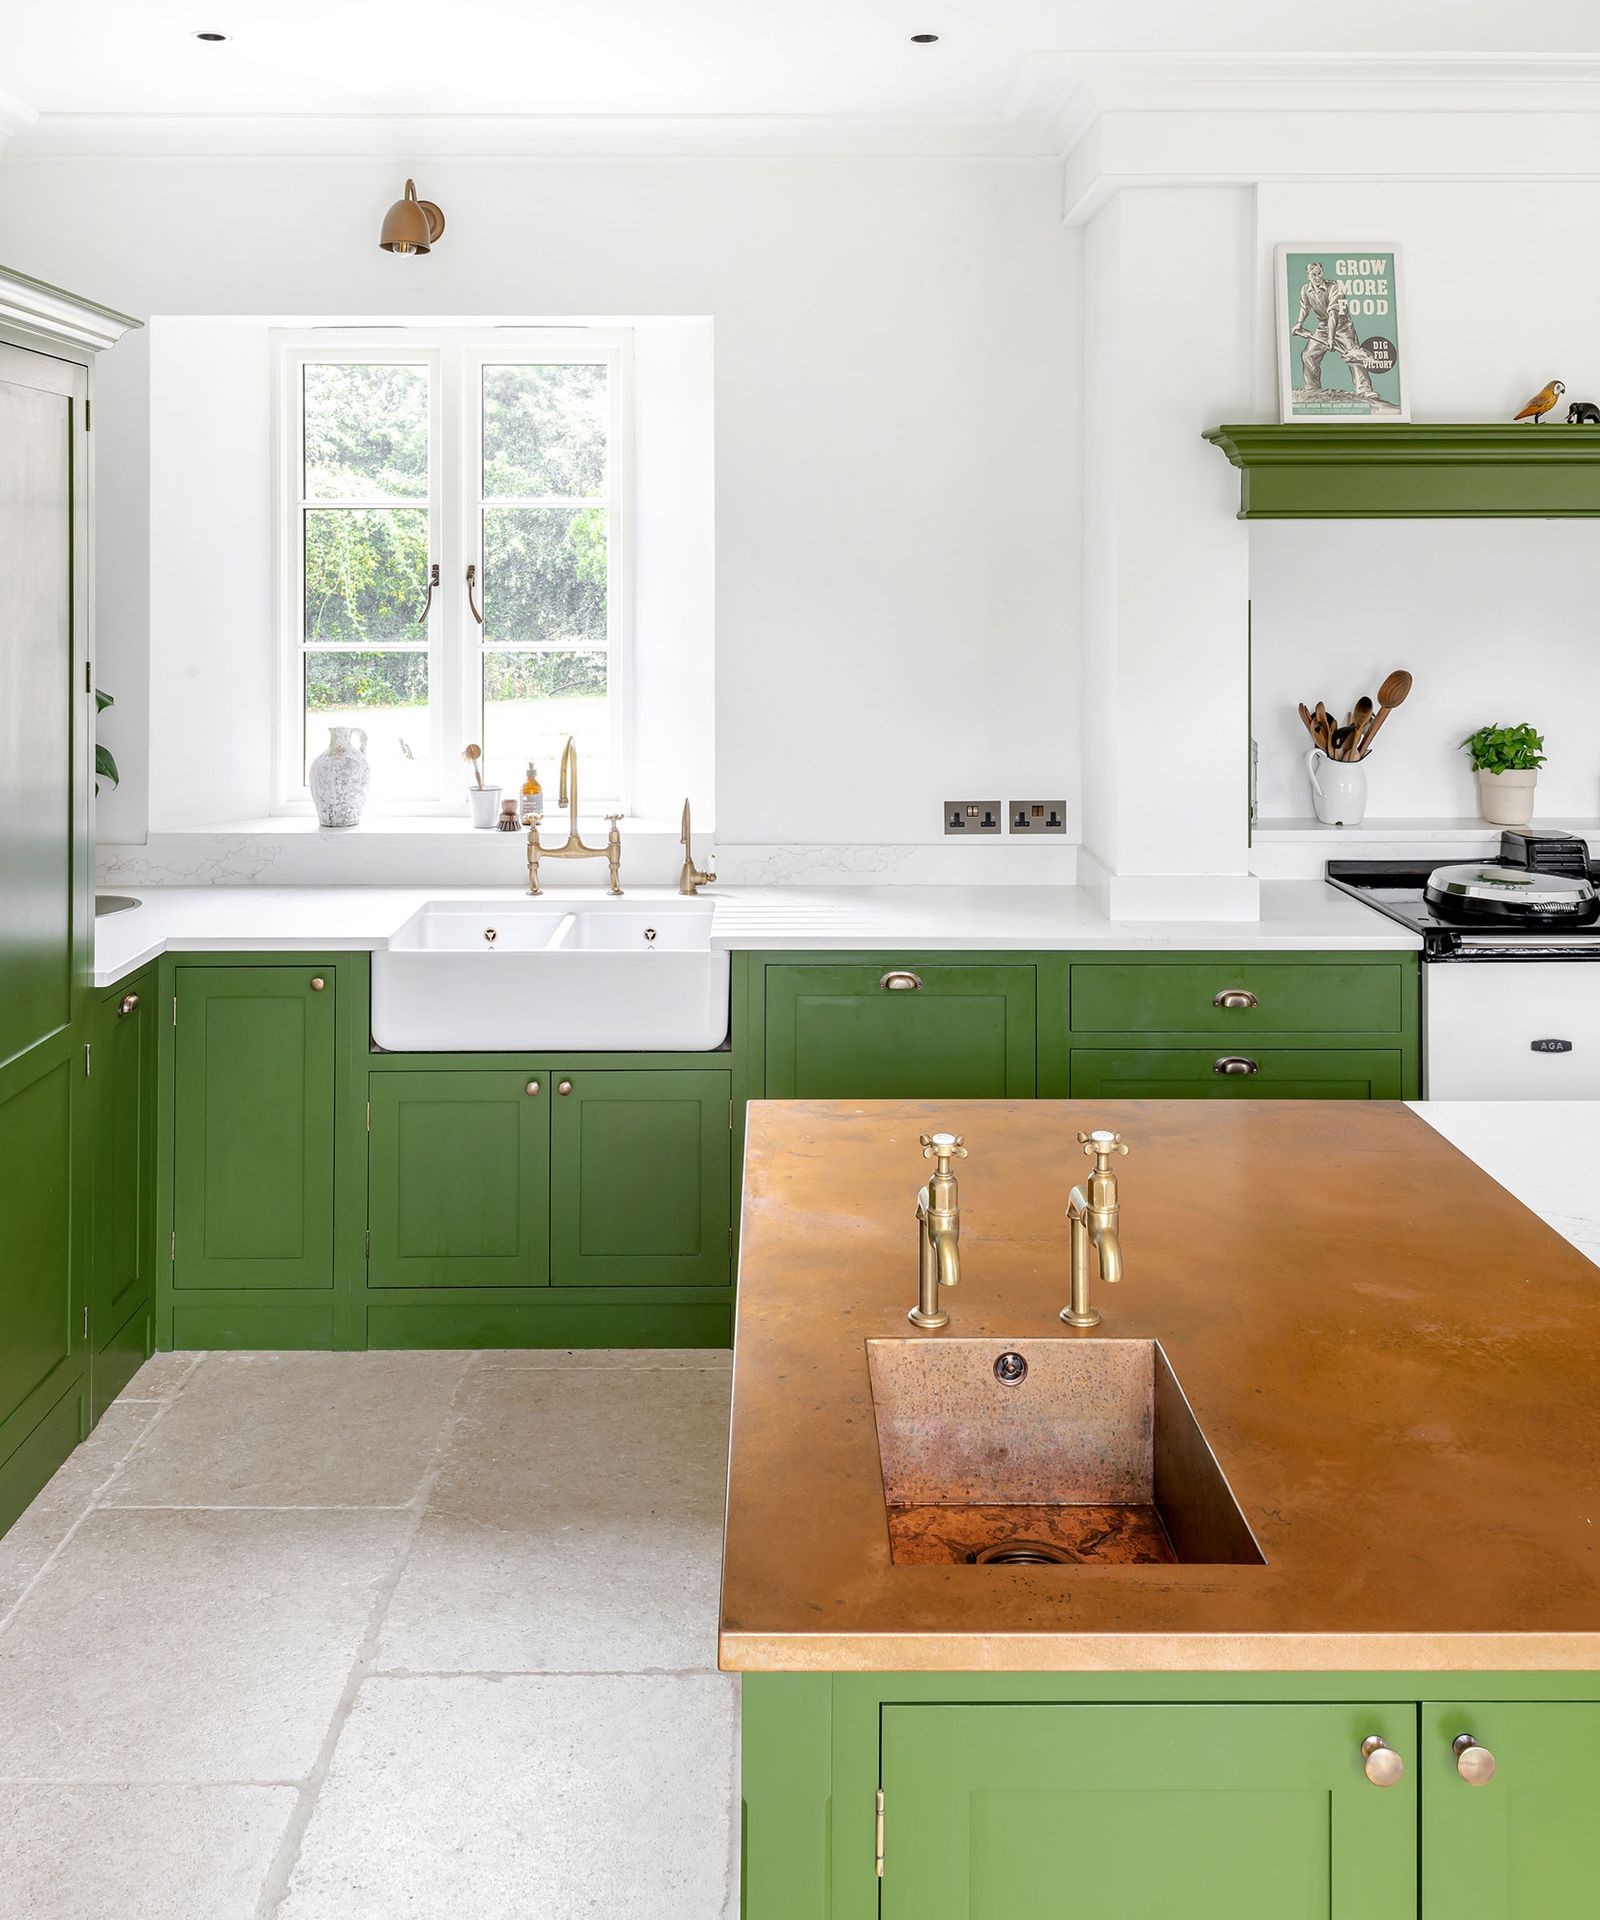 5 smart ways this green kitchen has been transformed with natural ...